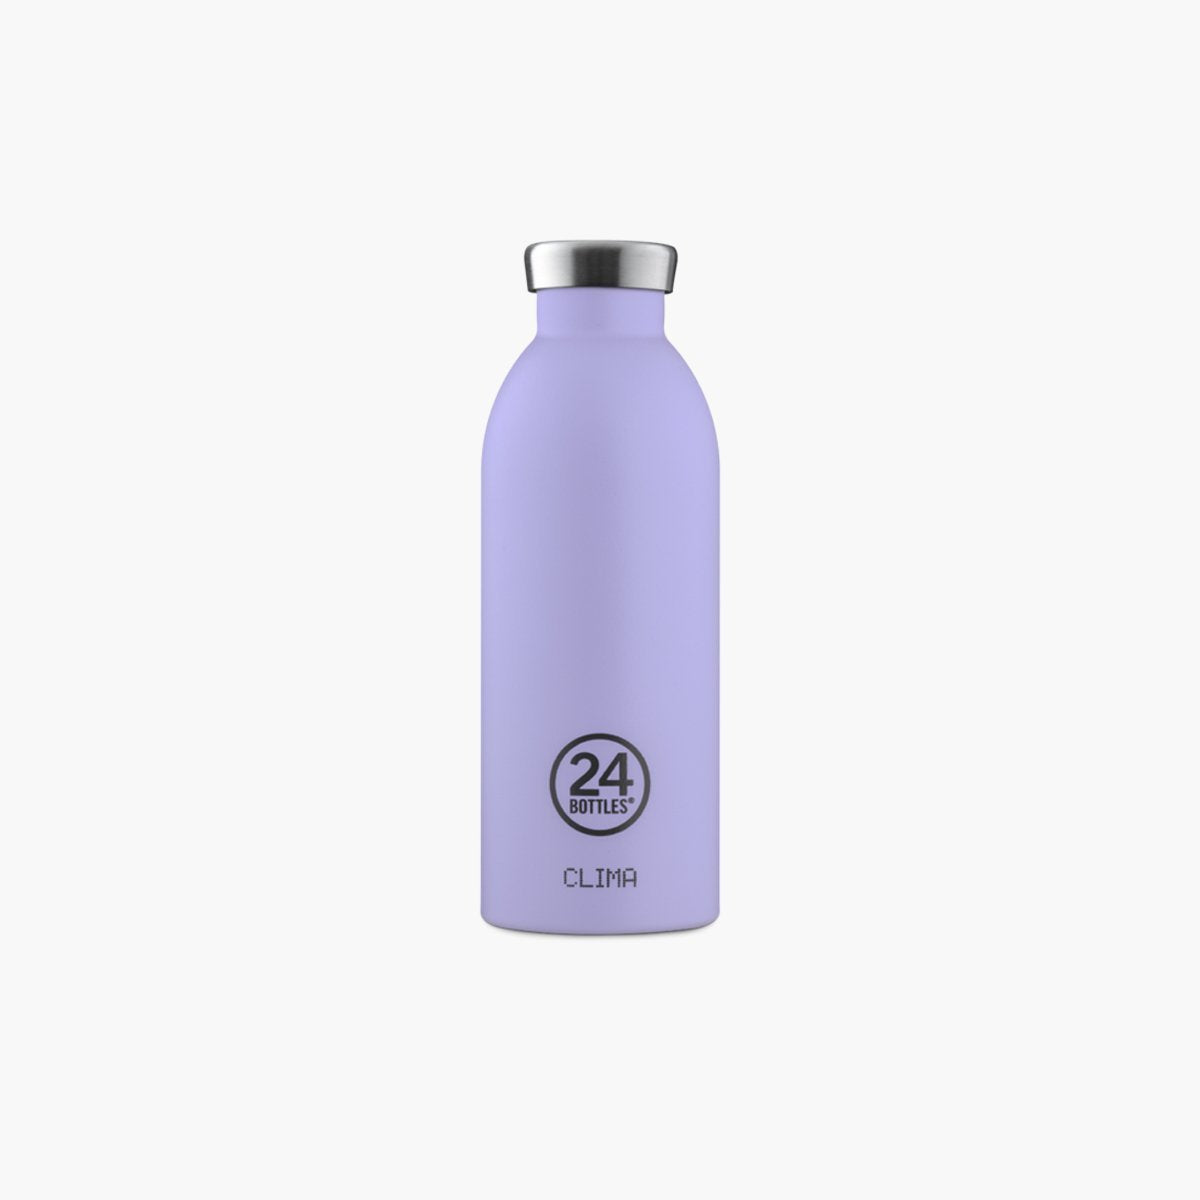 24 Bottles Clima Bottle 050 Stone Erica-8051513921858-Black-One Size-SUEDE Store